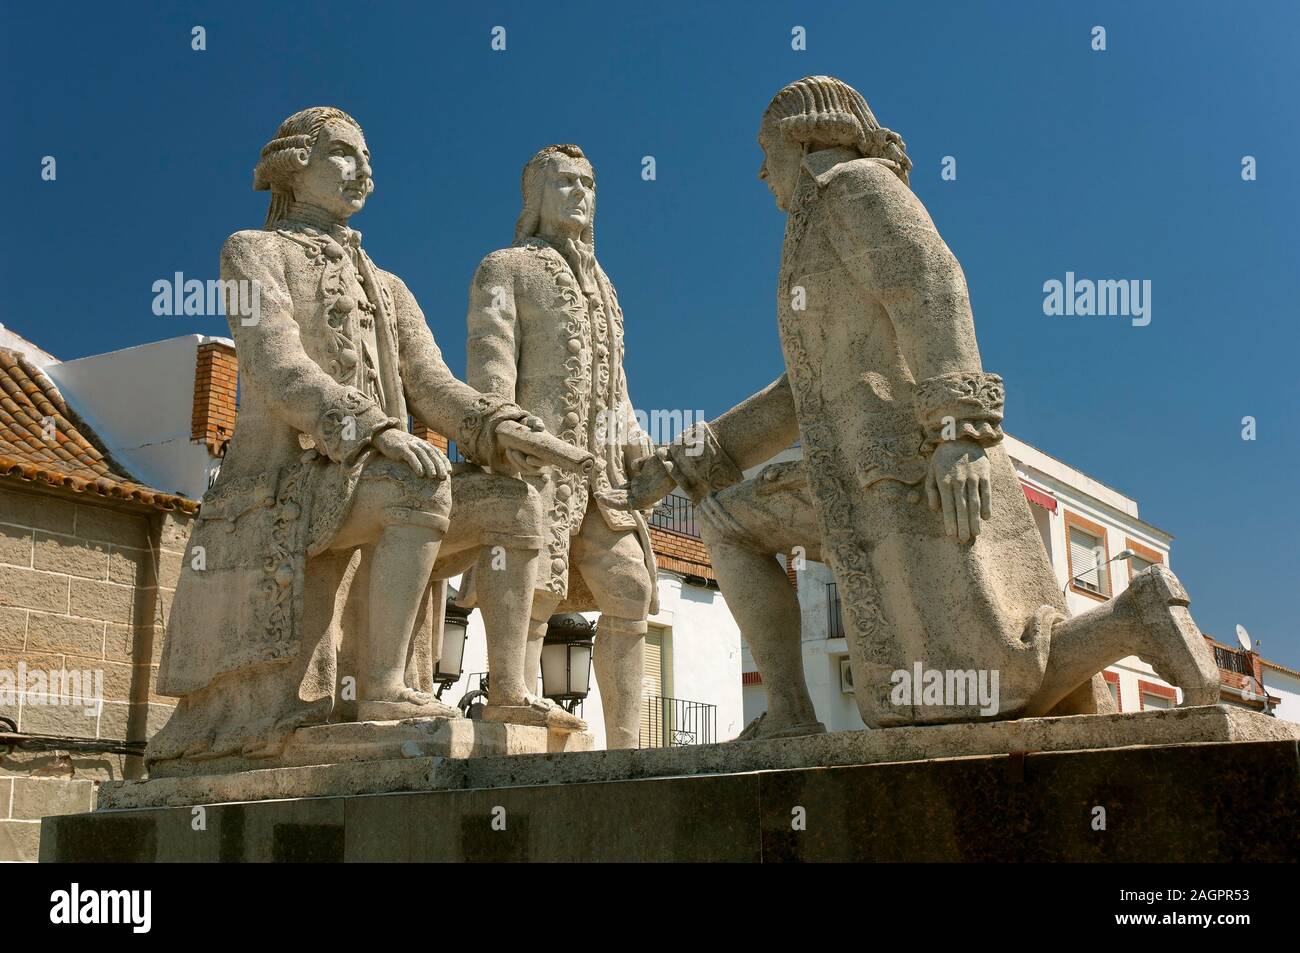 Commemorative monument to the Law of the New Populations, La Carlota, Cordoba province, Region of Andalusia, Spain, Europe. Stock Photo